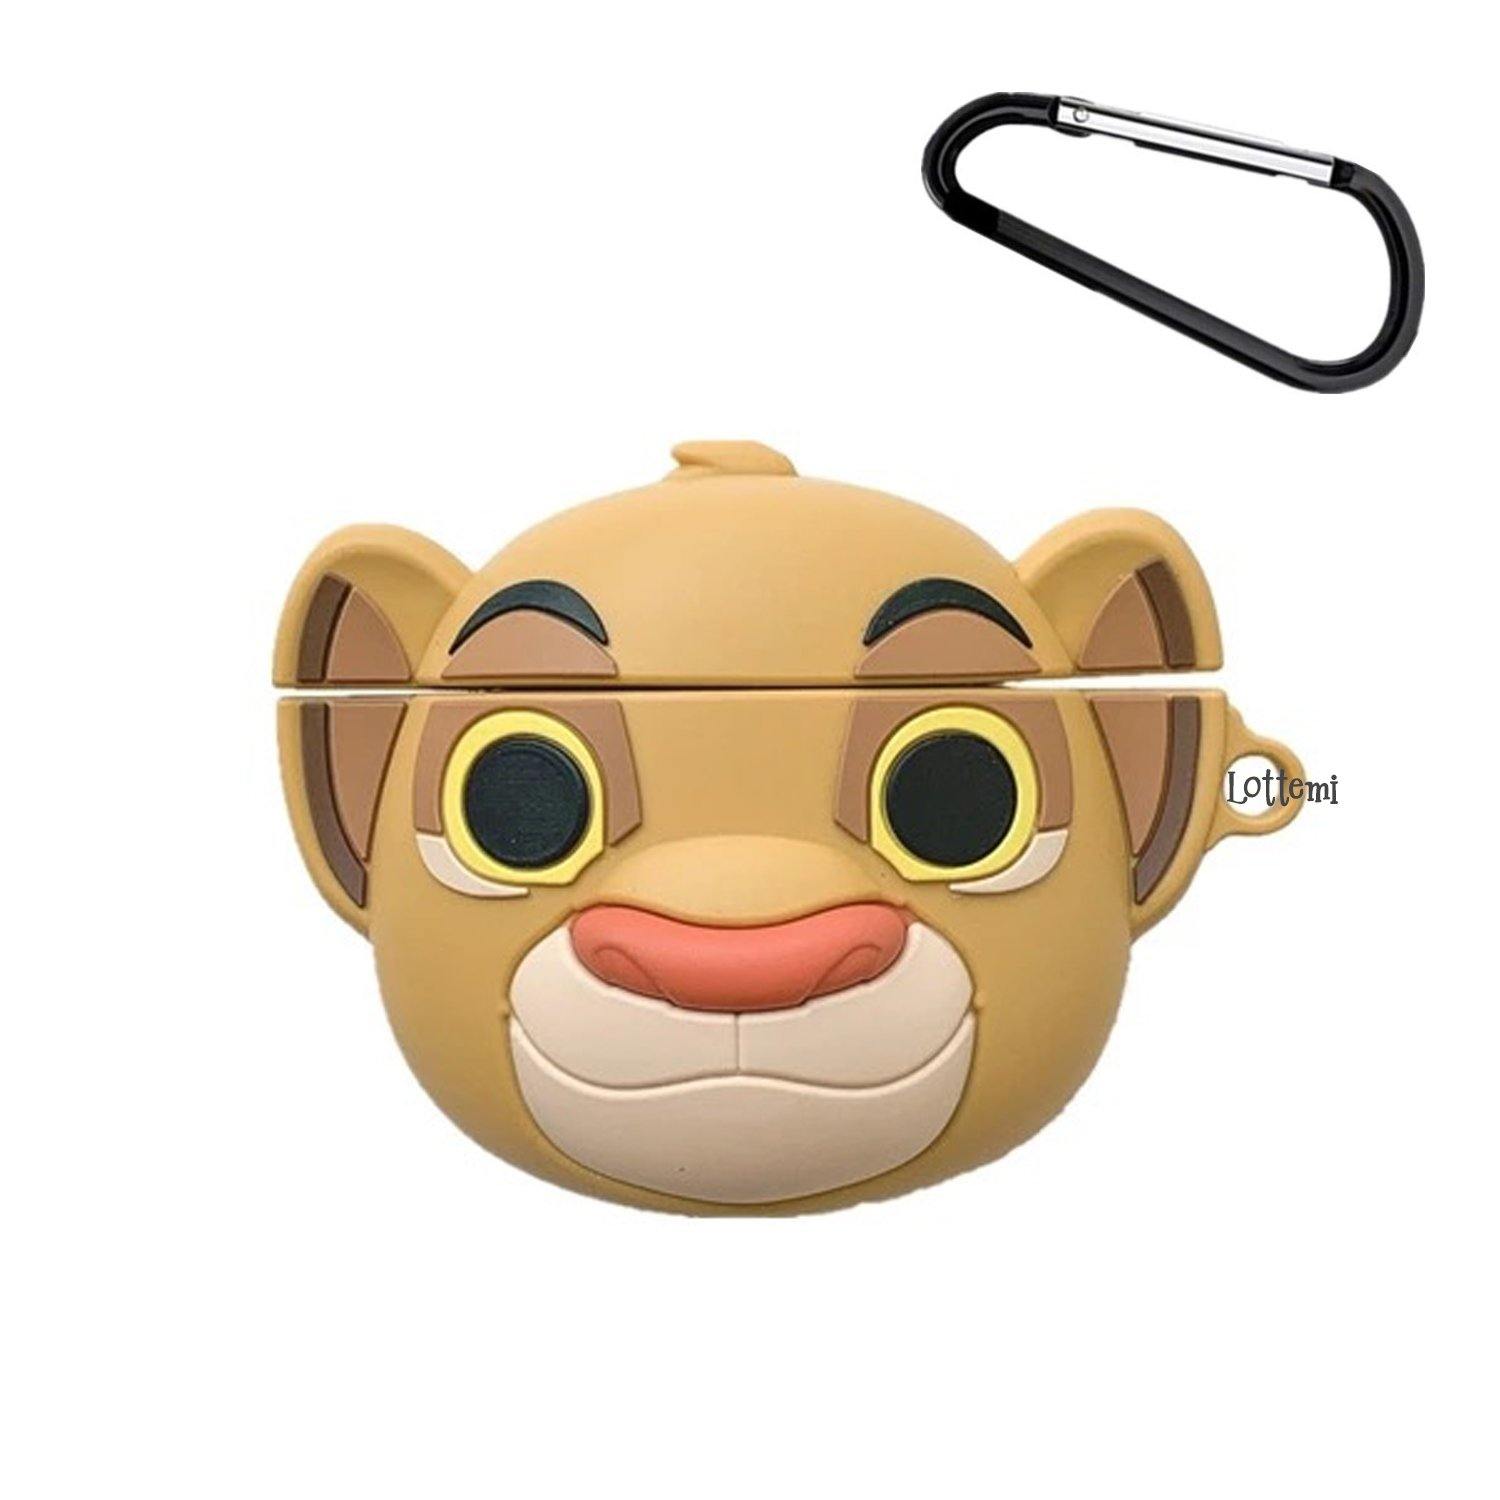 The Lion King Simba Apple Airpods Case - Lottemi